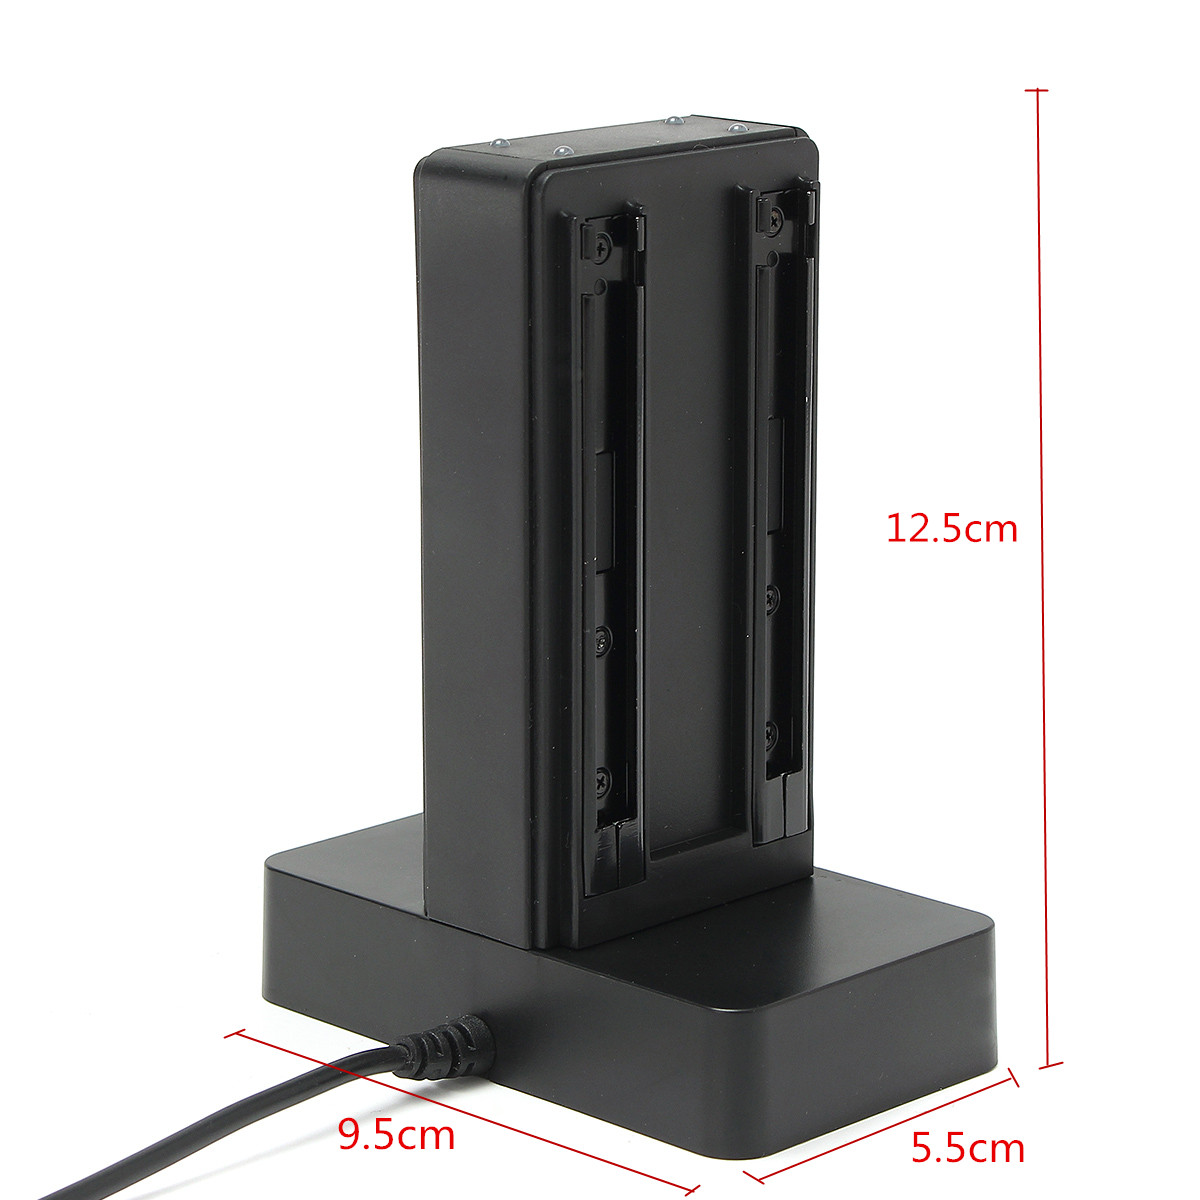 Charging Dock Station Charger Stand For Nintendo Switch 4 Joy-Con Controller 101